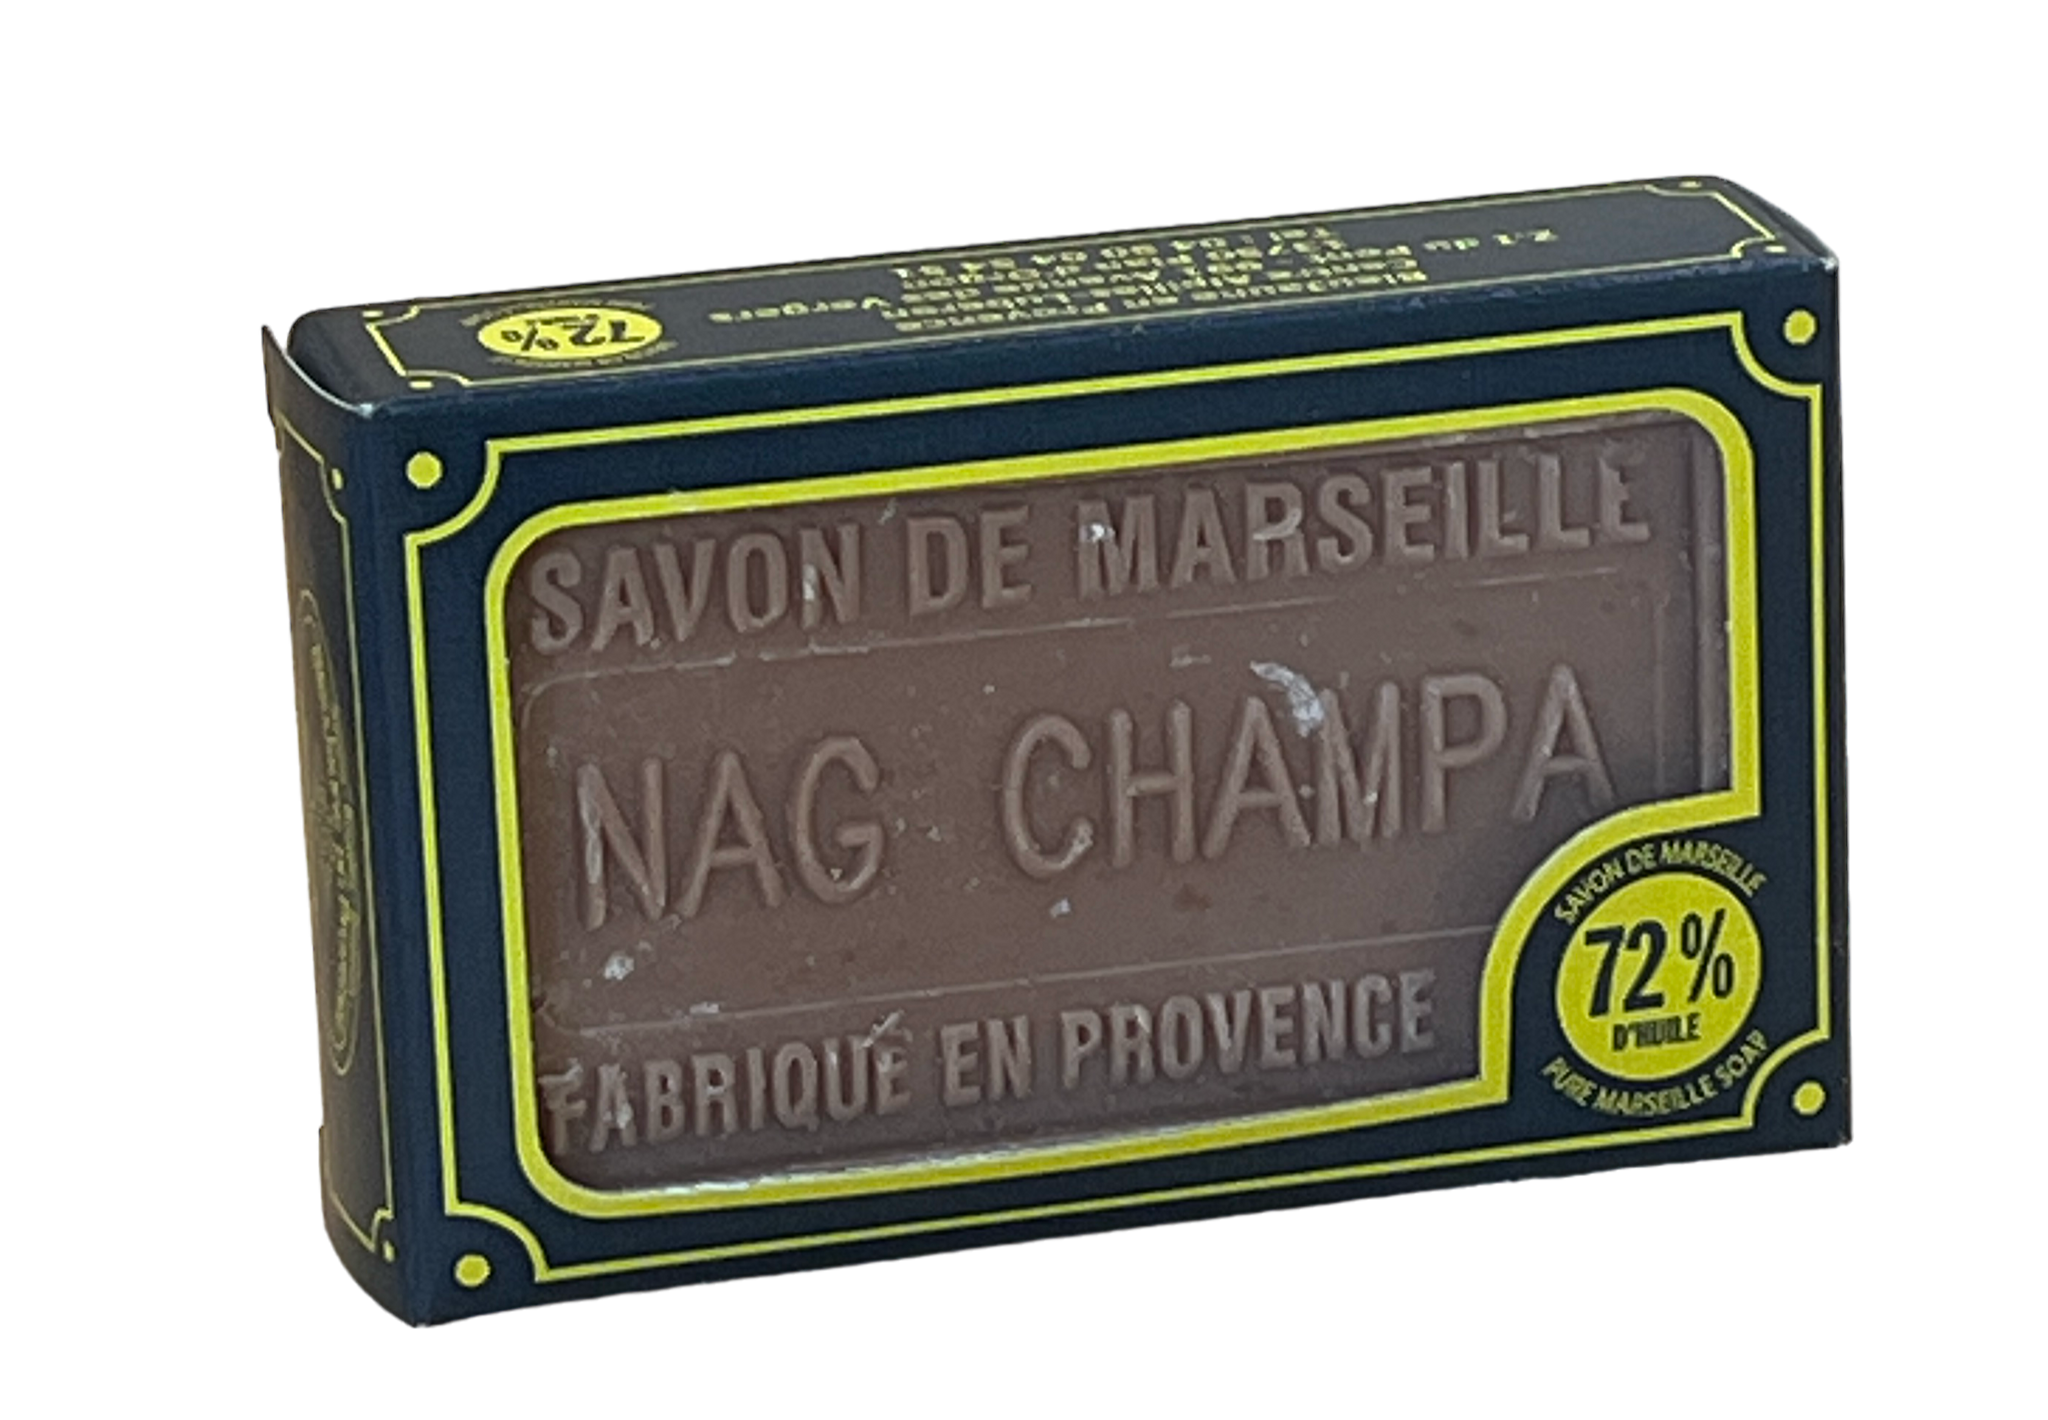 Nag Champa (Sweet Sandalwood), Marseille Soap with Shea Butter | 100g